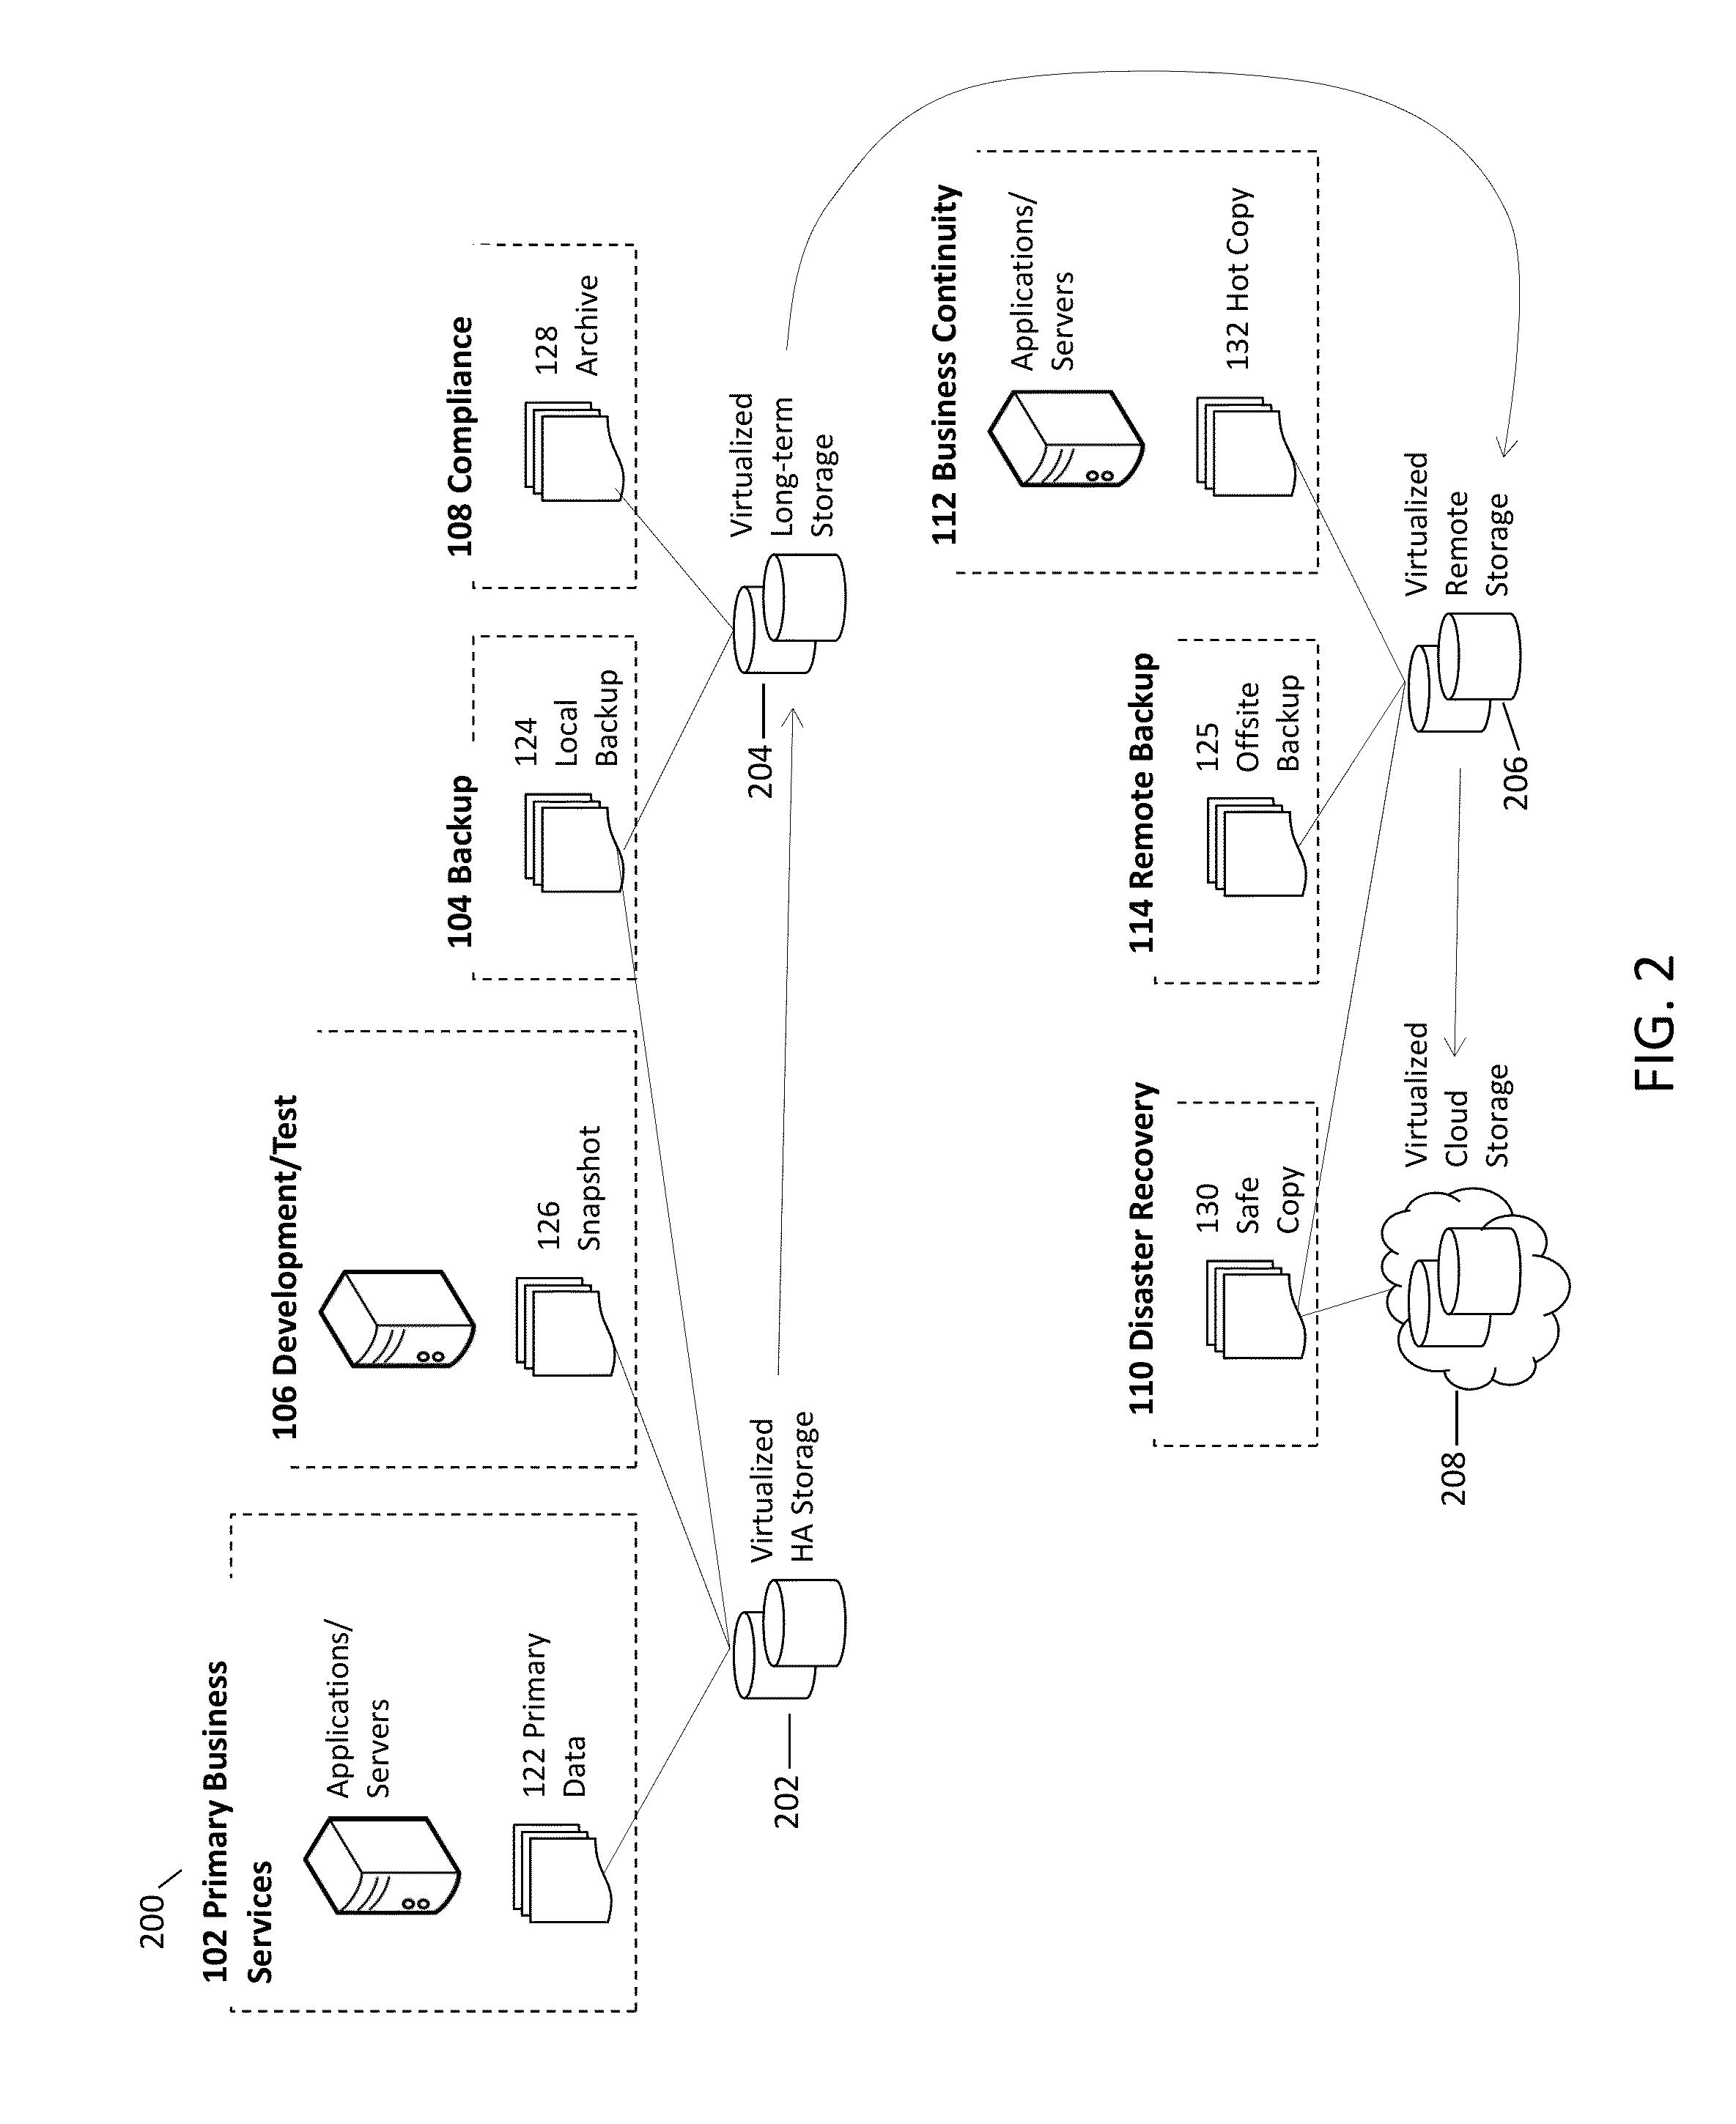 System and method for incrementally backing up out-of-band data